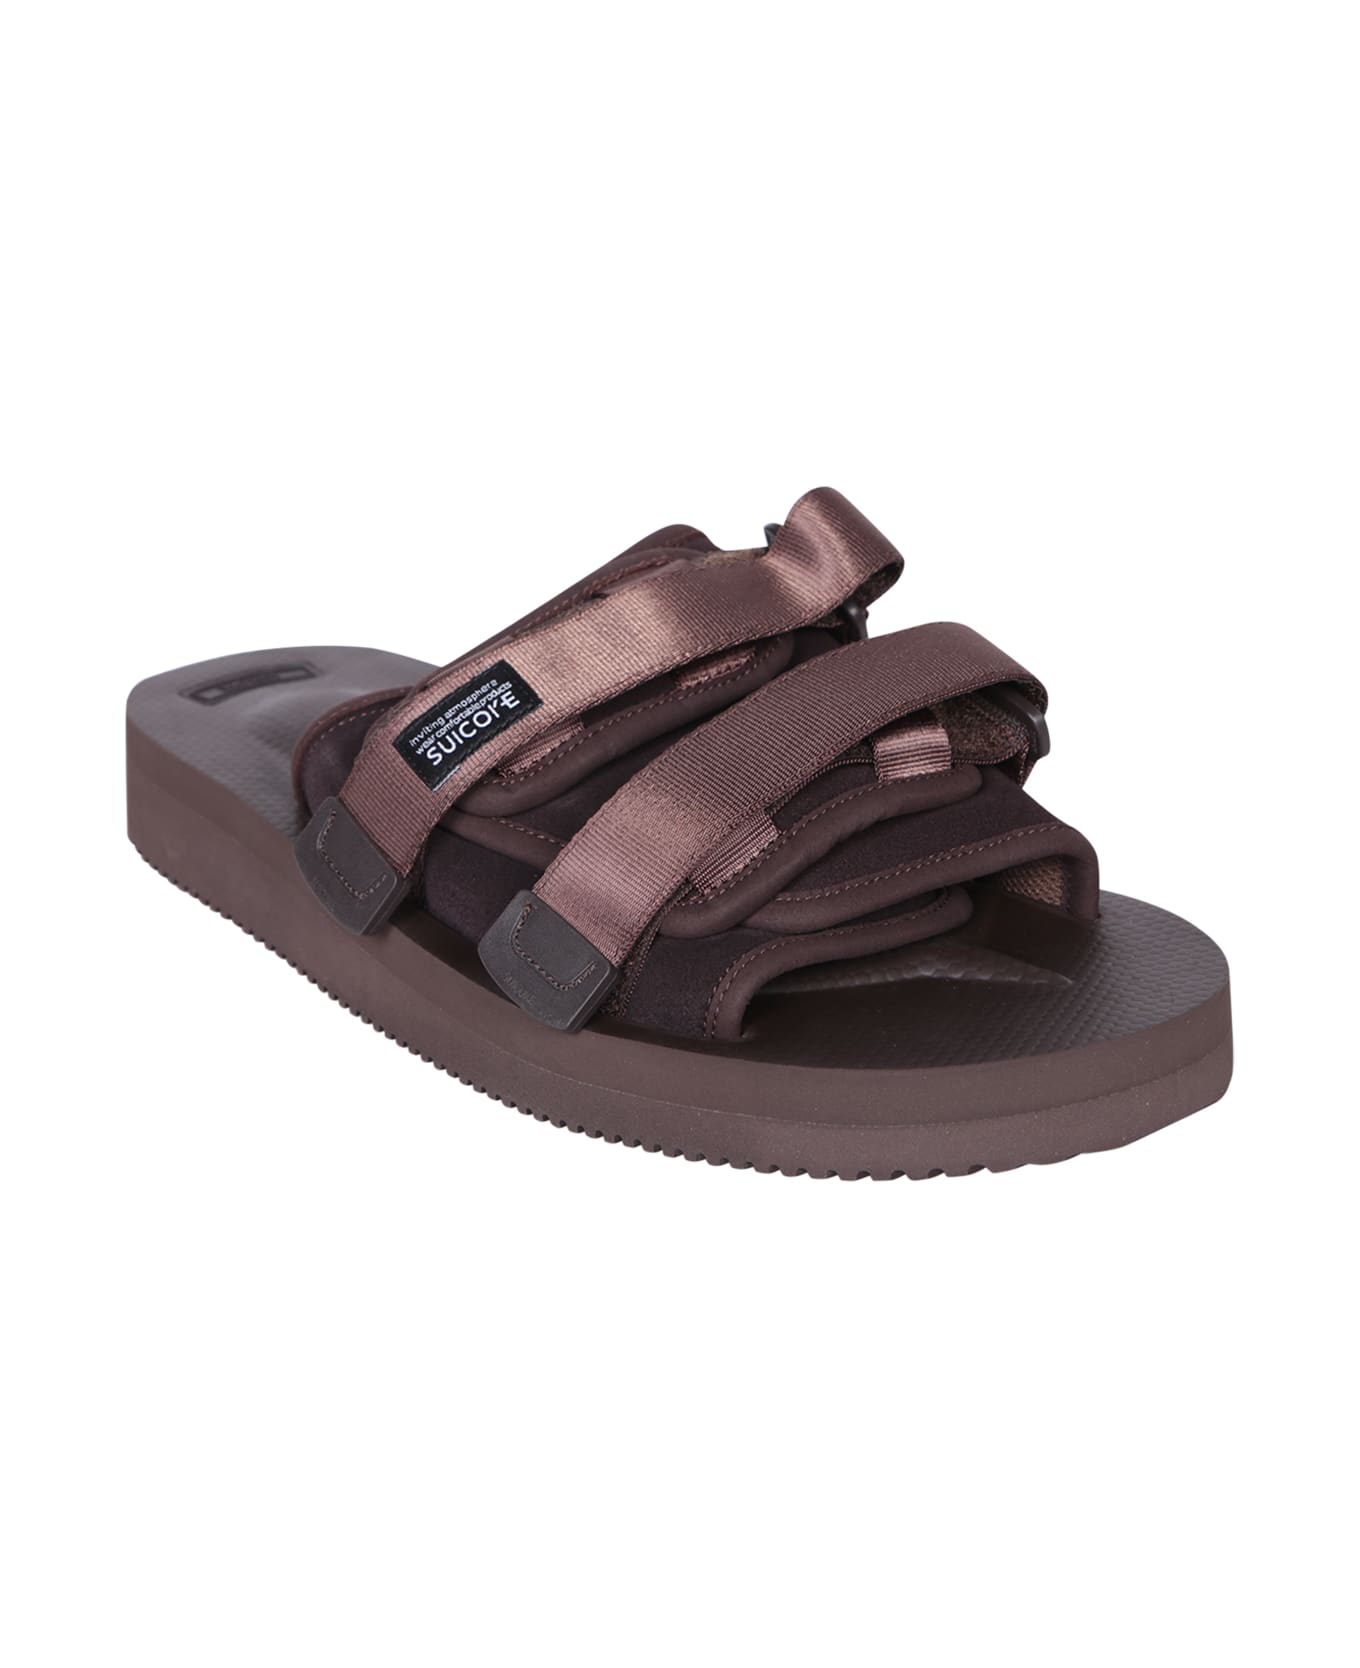 SUICOKE Moto Cab Brown Sandals - Brown その他各種シューズ